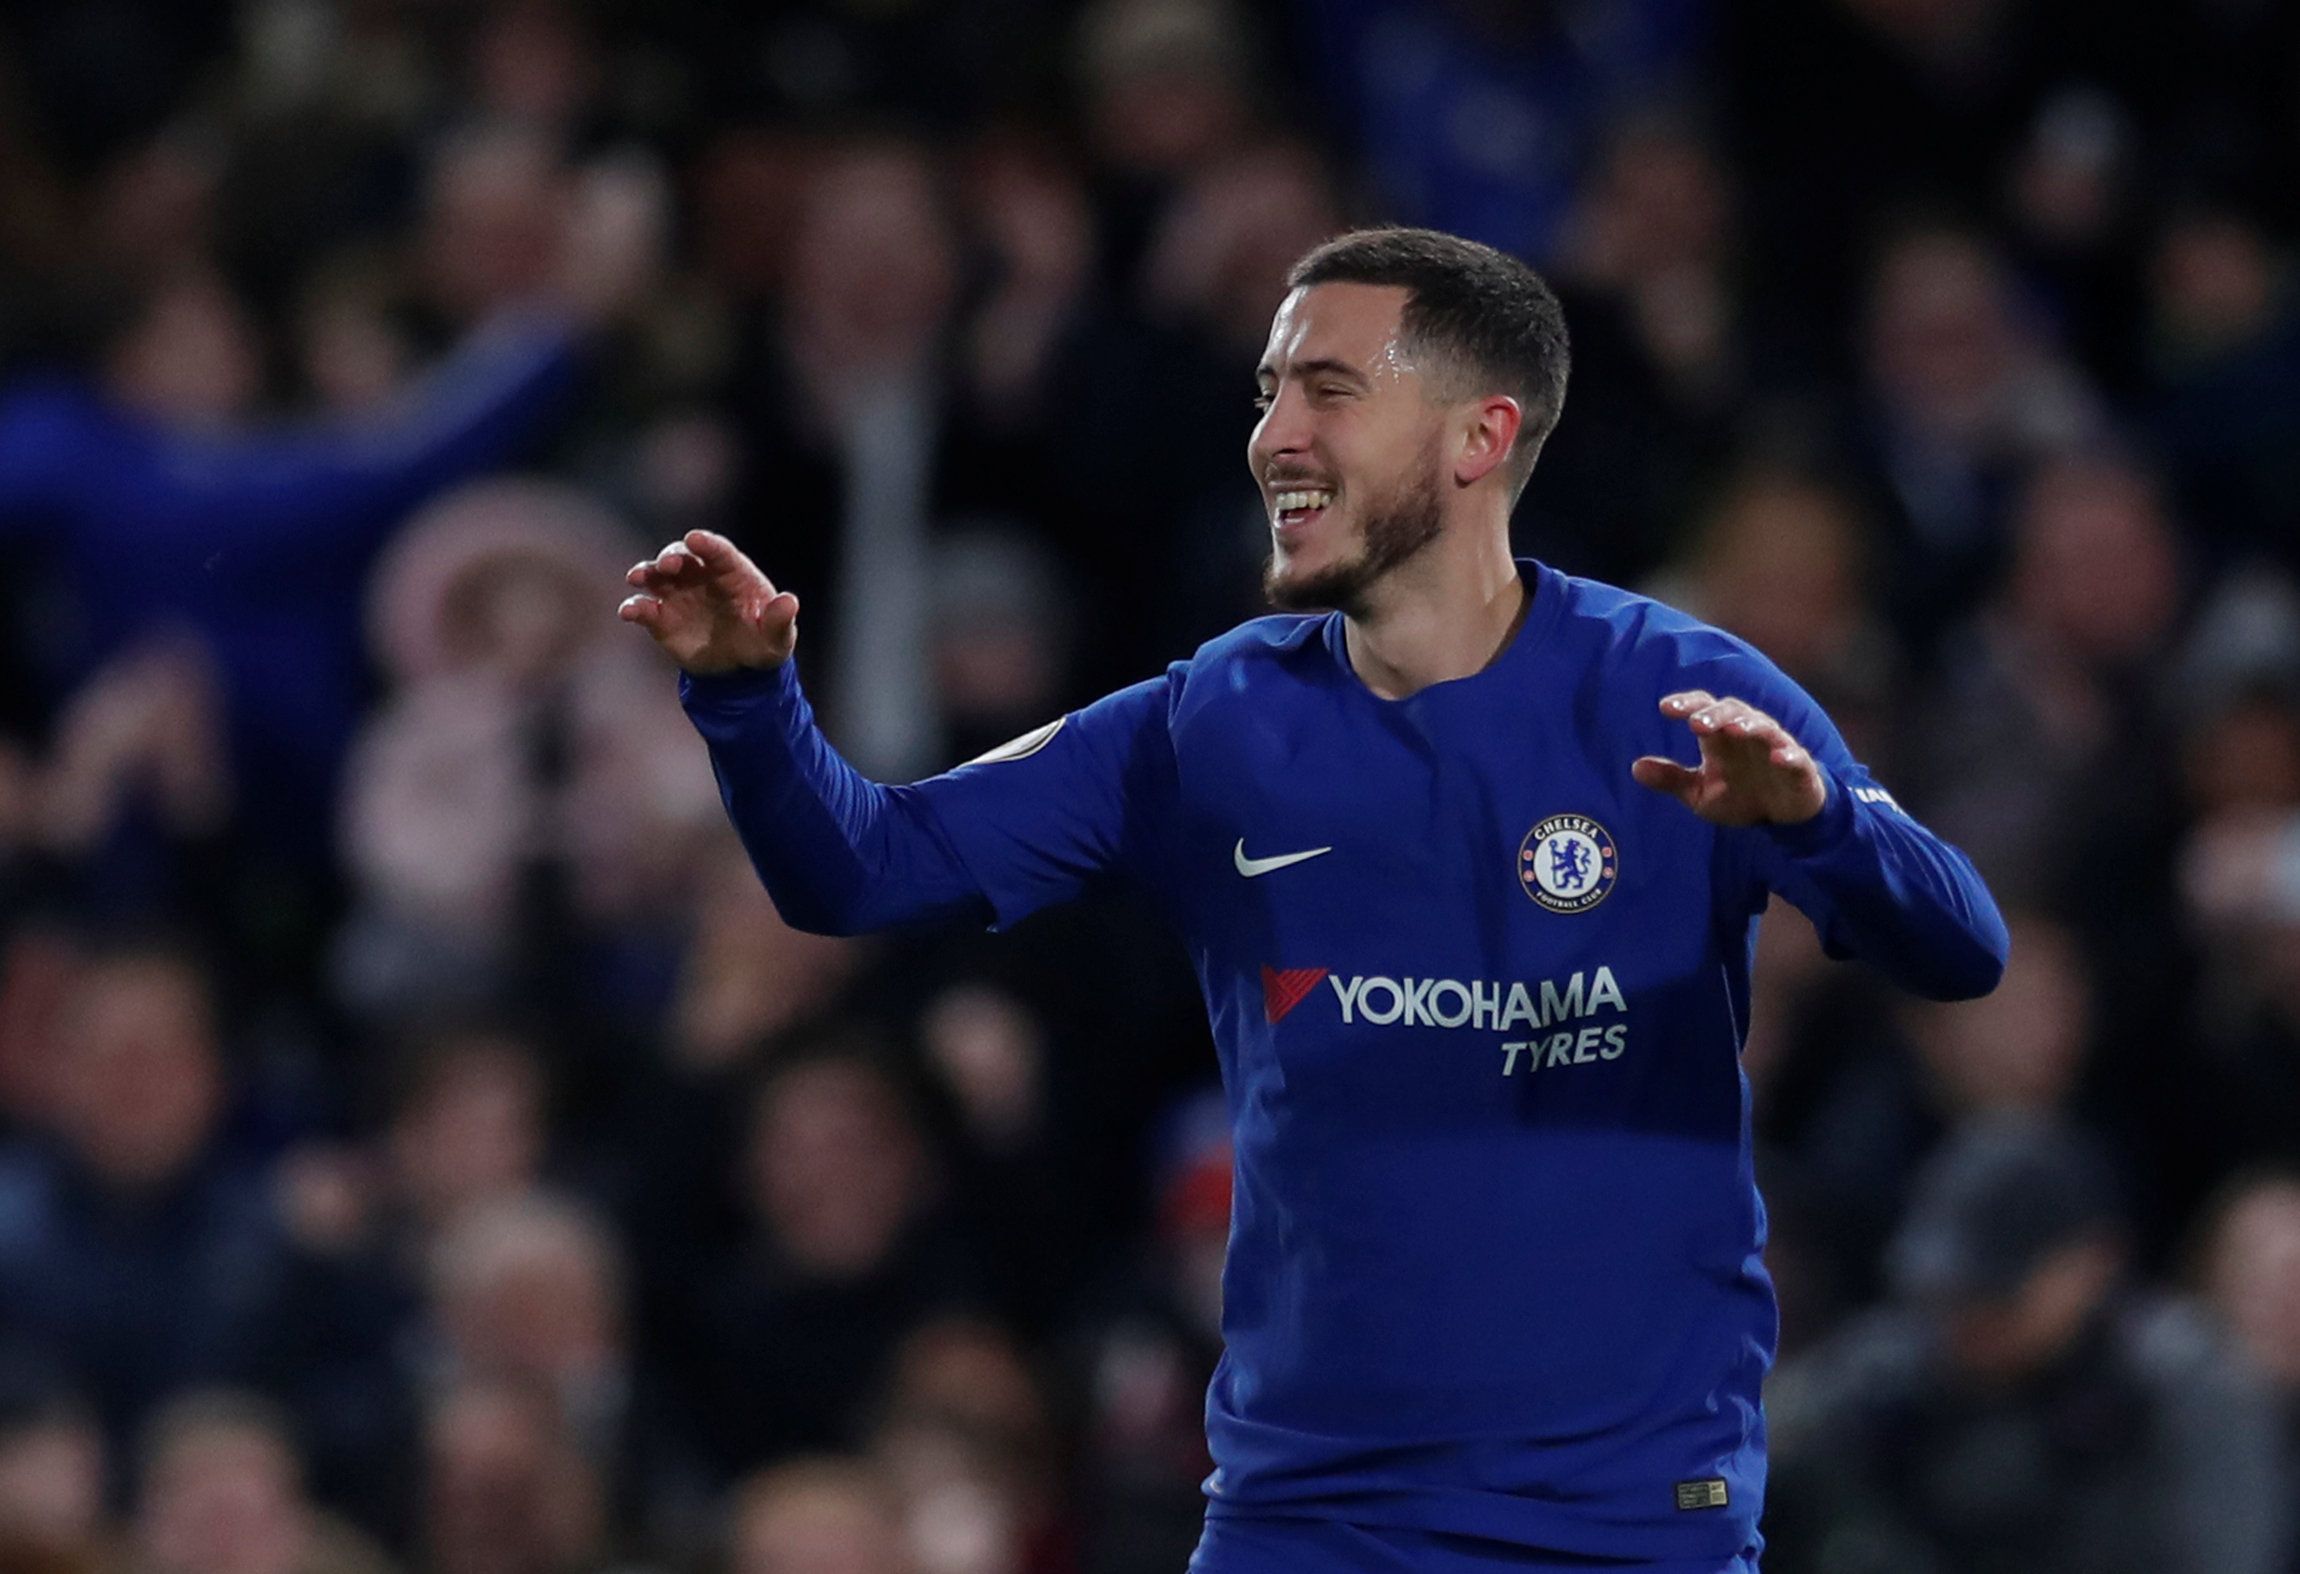 Soccer Football - Premier League - Chelsea vs West Bromwich Albion - Stamford Bridge, London, Britain - February 12, 2018   Chelsea's Eden Hazard celebrates scoring their first goal    Action Images via Reuters/Andrew Couldridge    EDITORIAL USE ONLY. No use with unauthorized audio, video, data, fixture lists, club/league logos or 